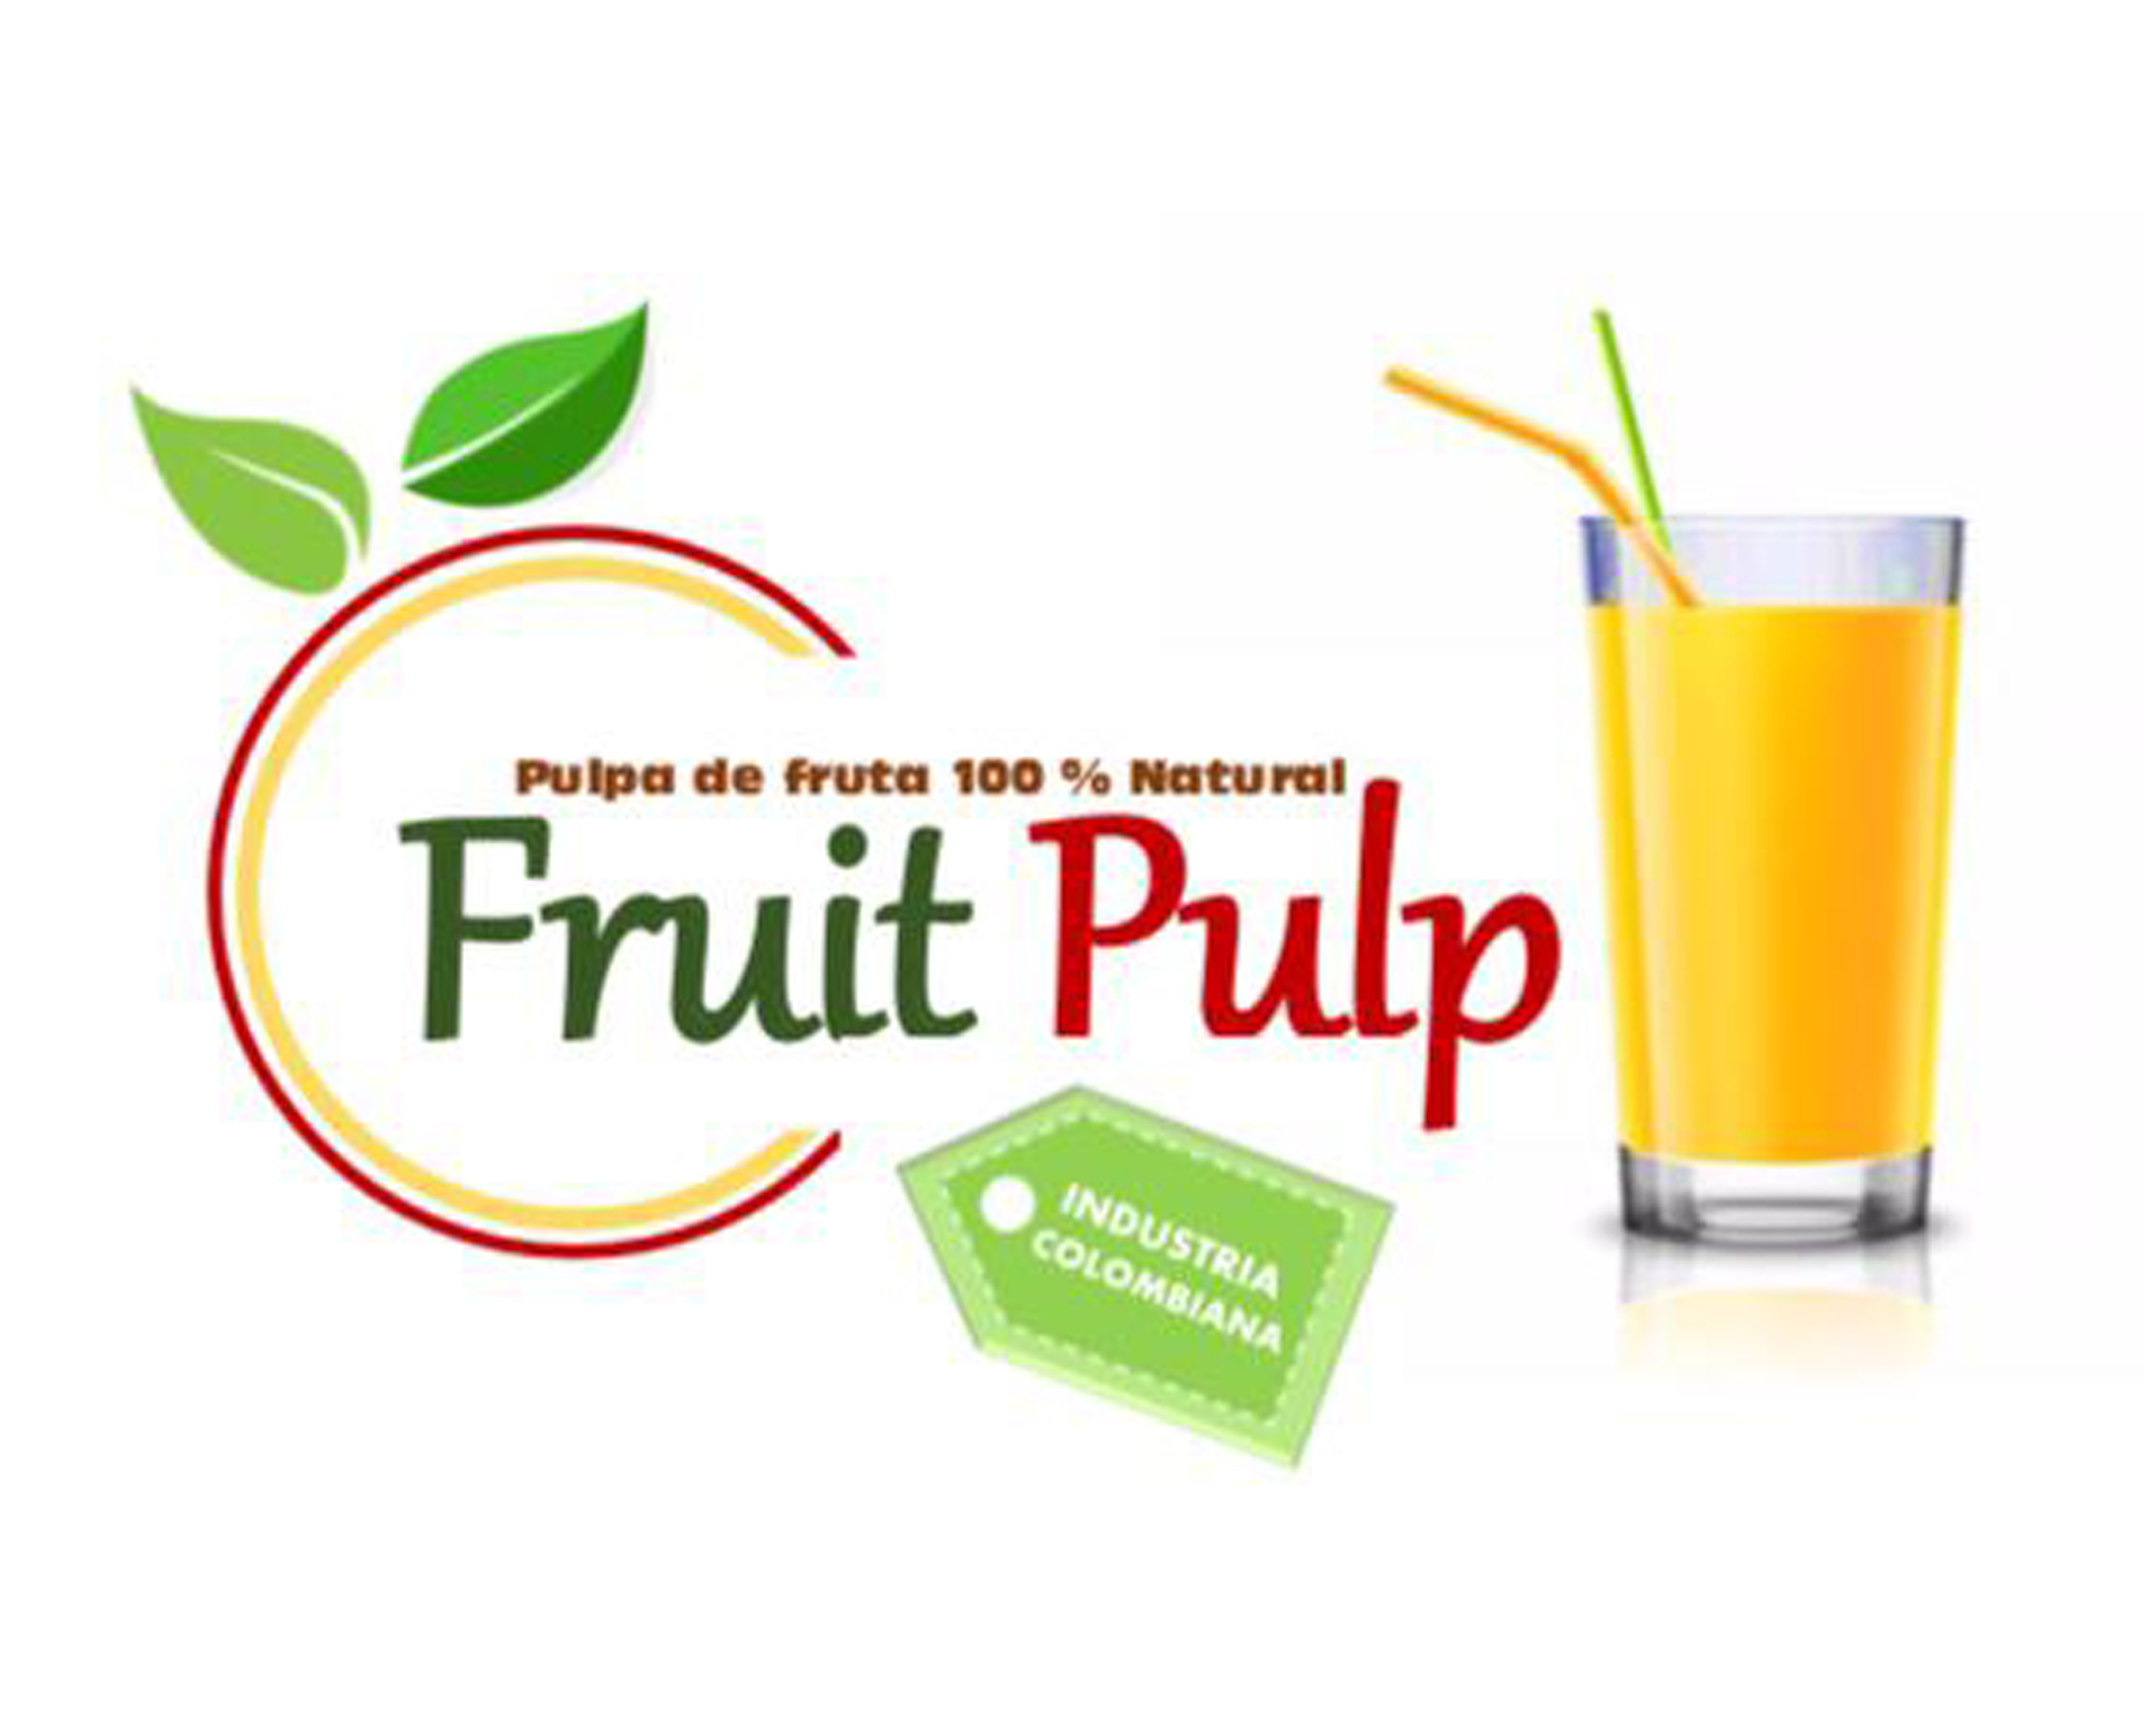 FRUIT PULP 100% NATURAL S.A.S.